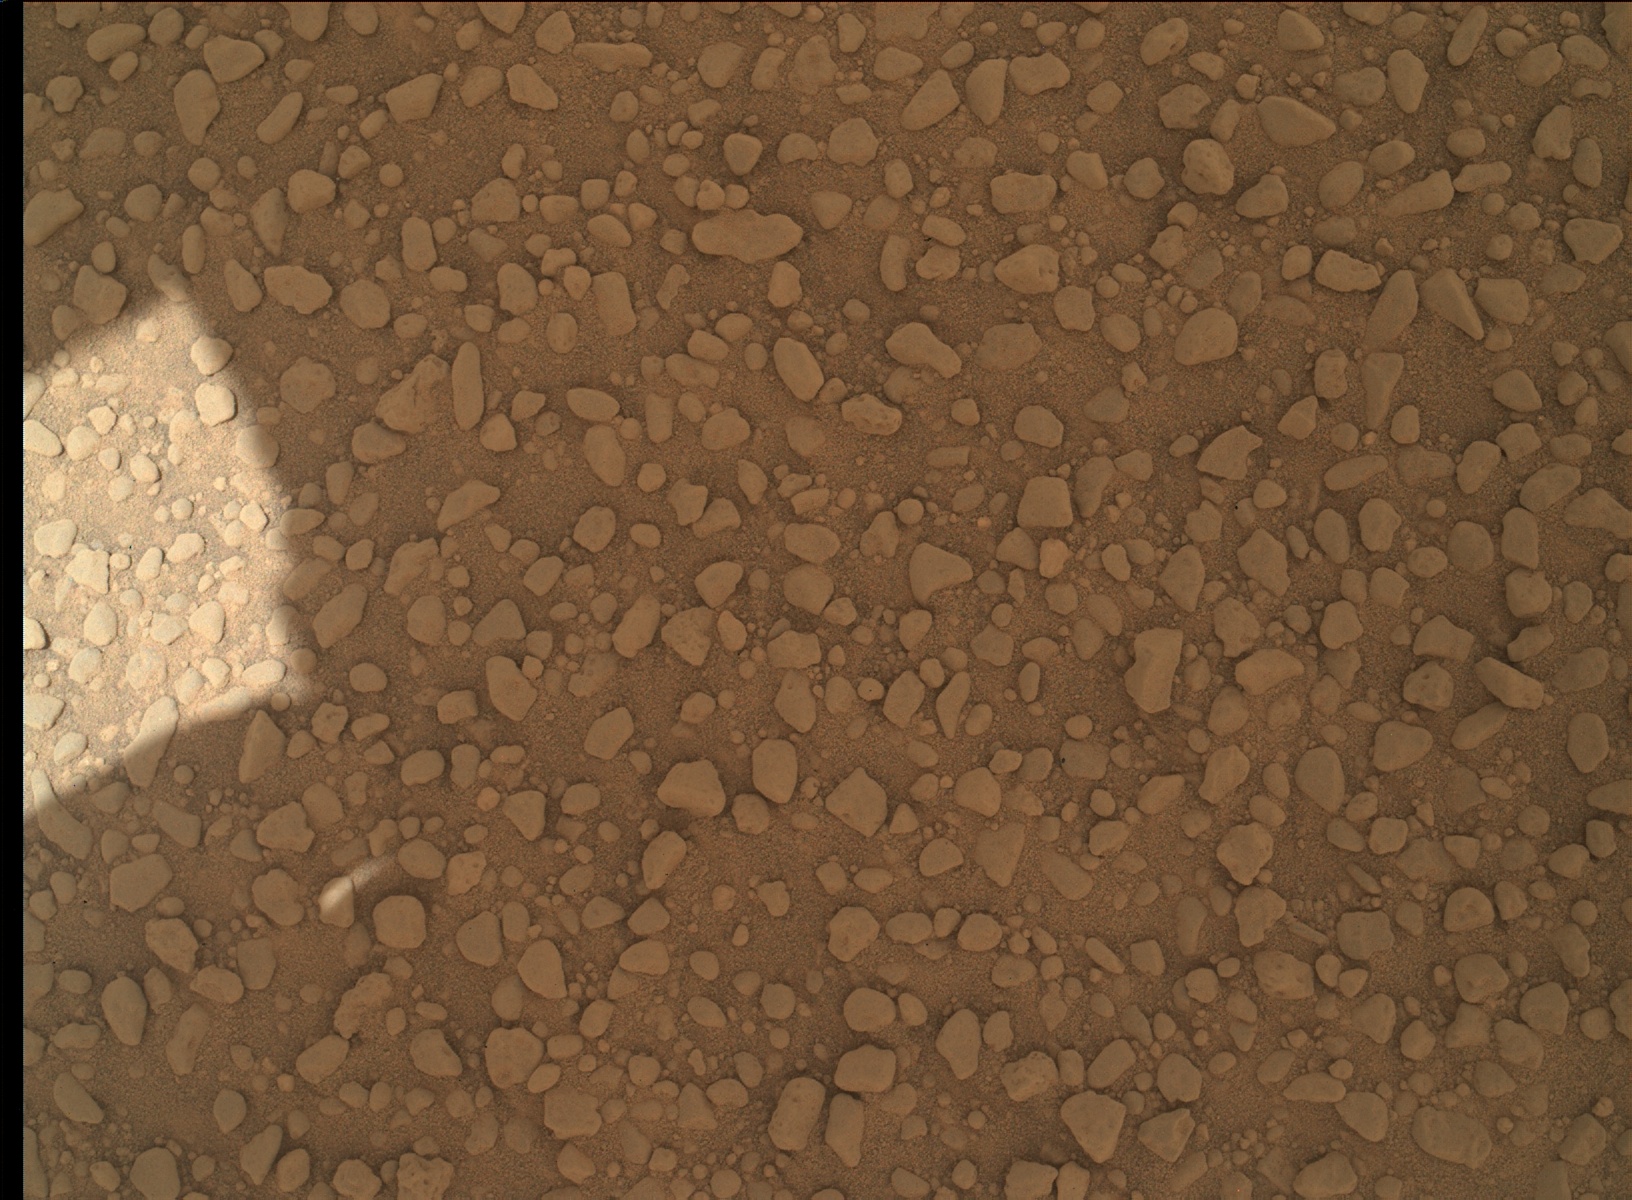 Nasa's Mars rover Curiosity acquired this image using its Mars Hand Lens Imager (MAHLI) on Sol 704